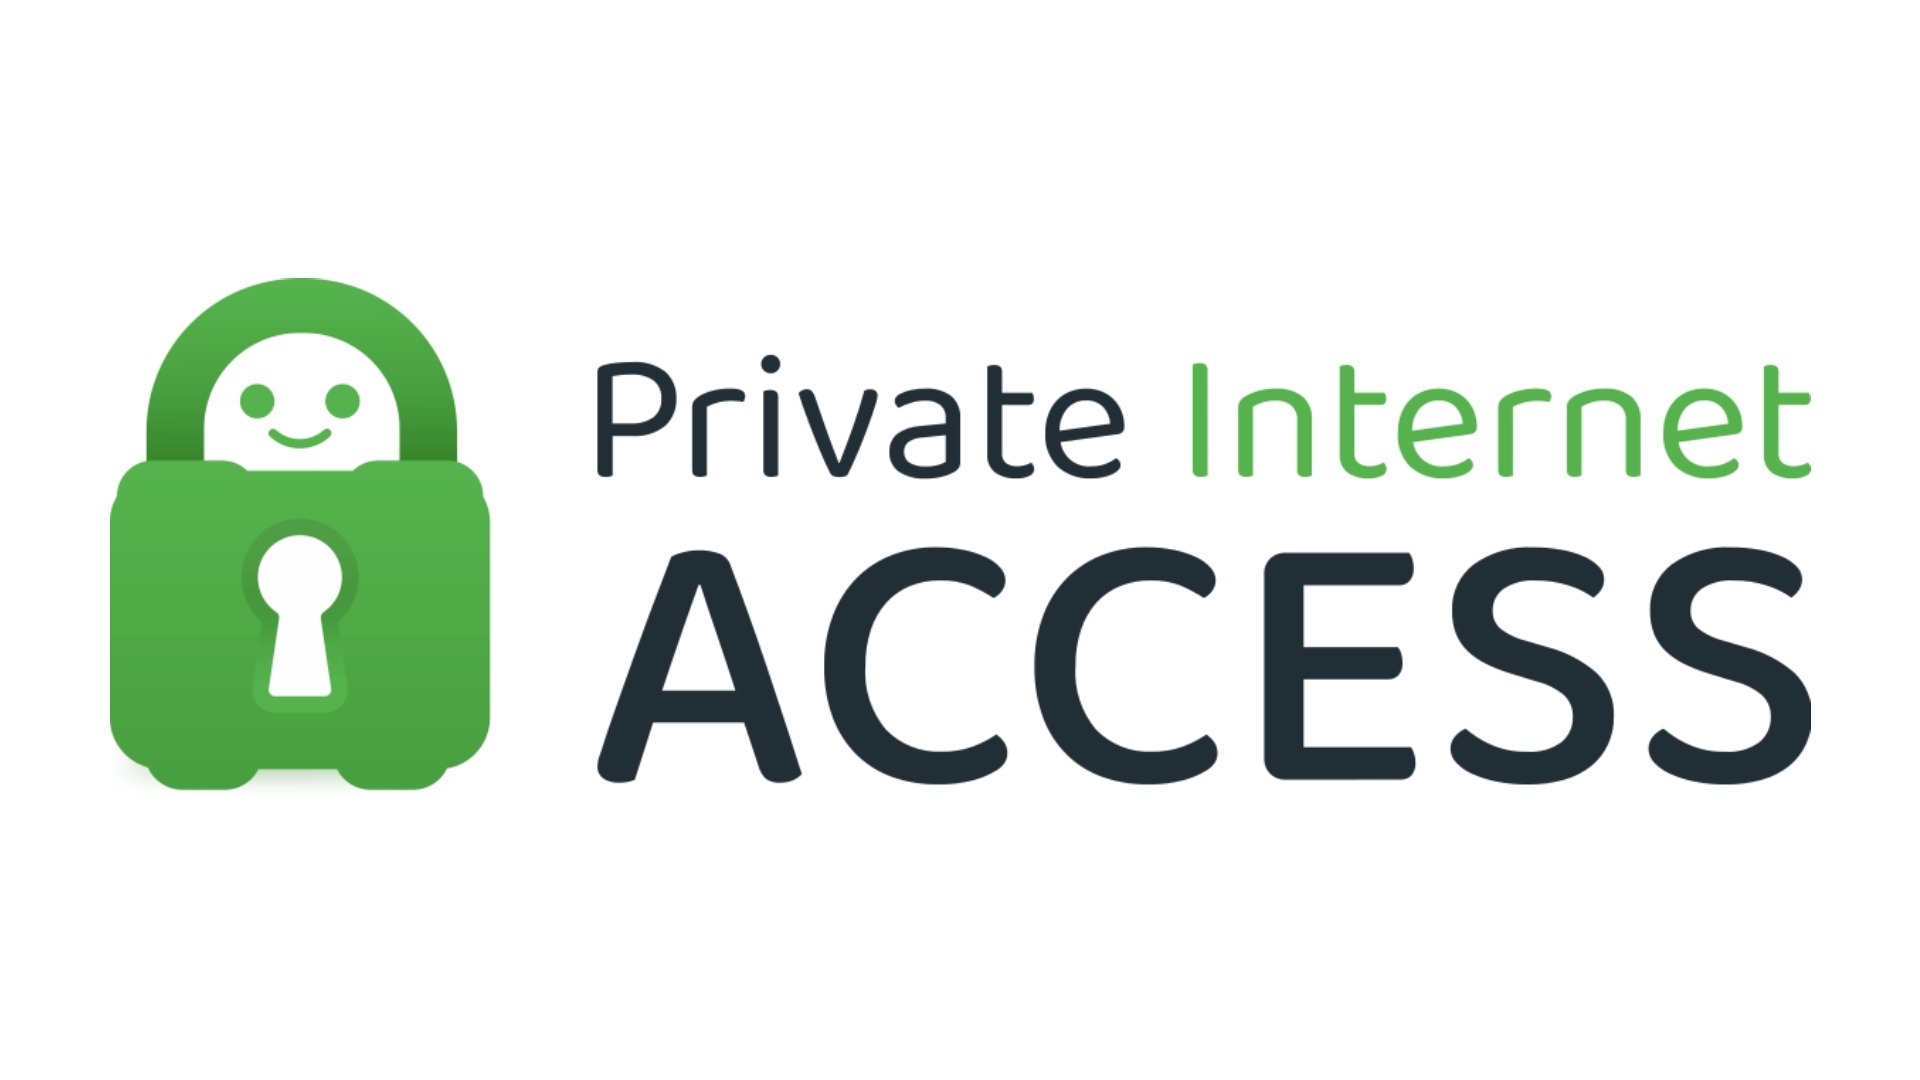 Best Linux VPN: Private Internet Access. Image shows the company logo.